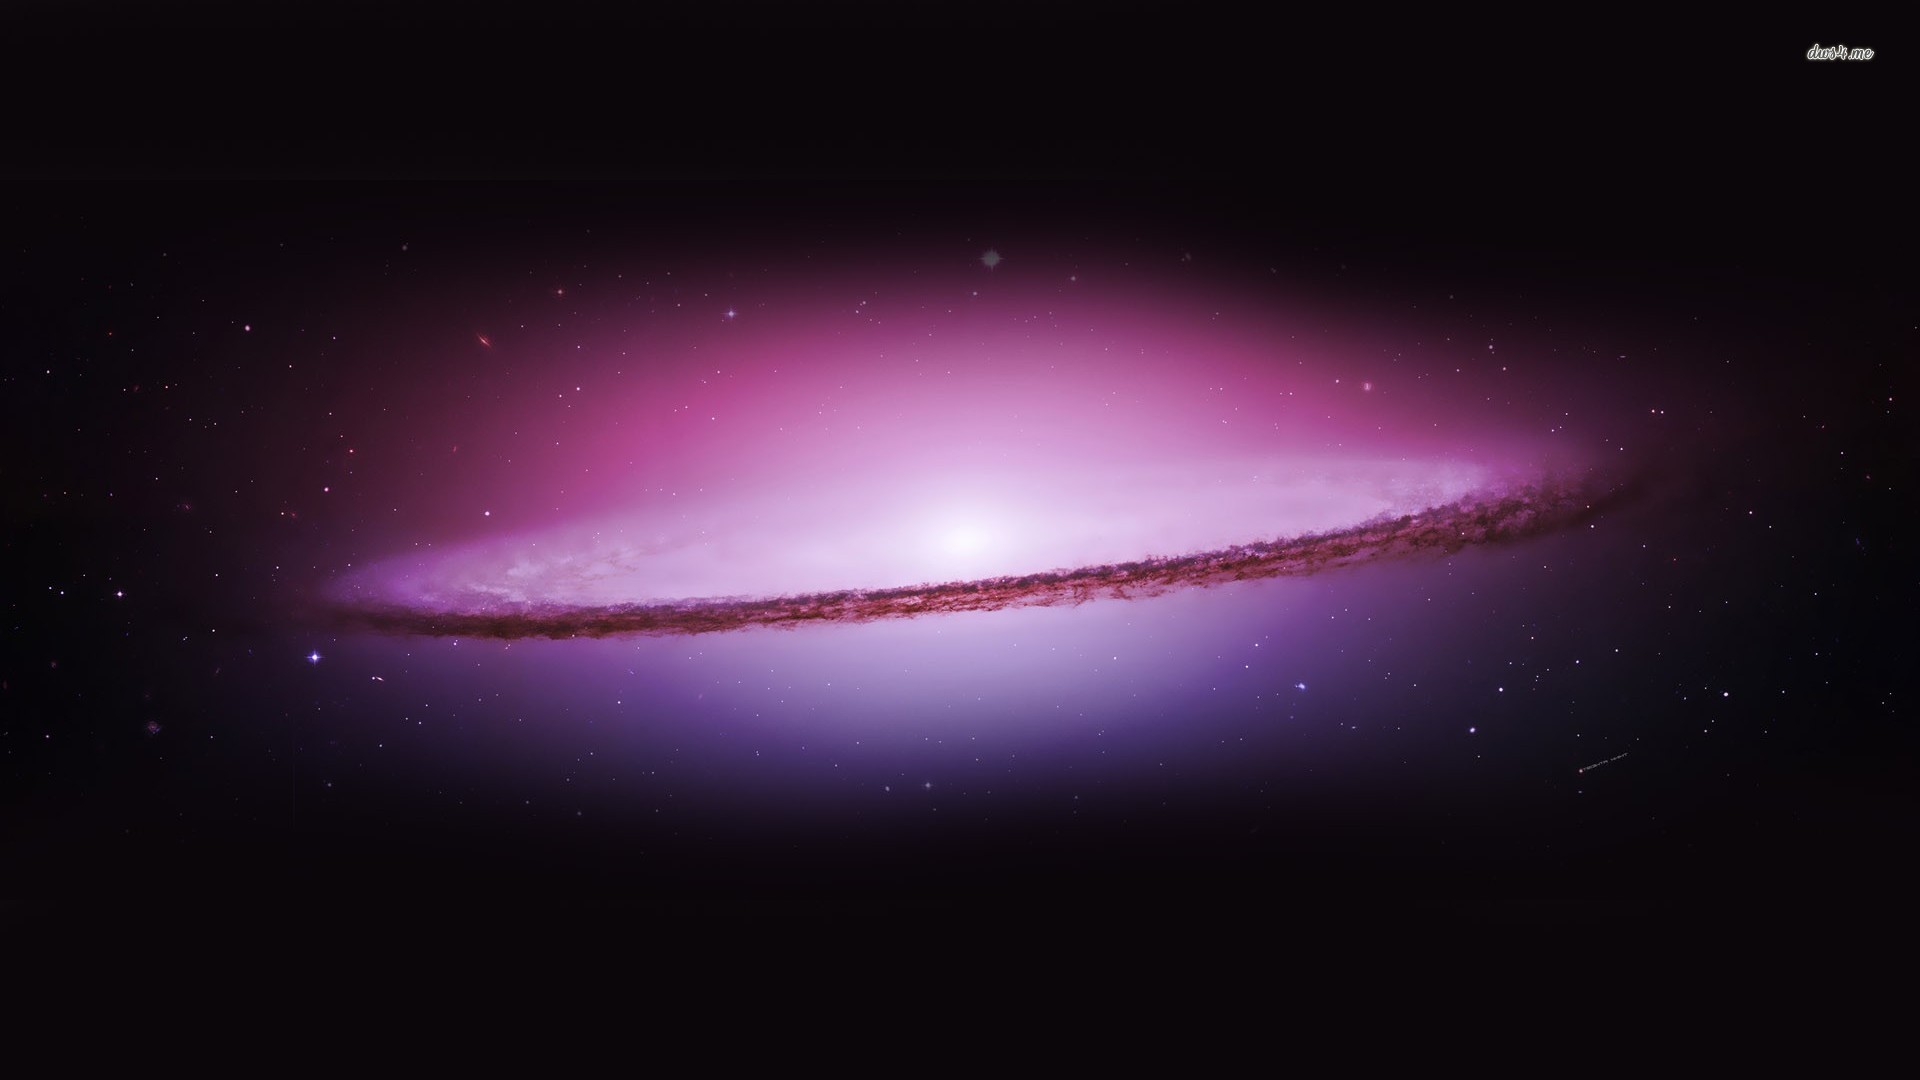 Imac Wallpaper Galaxy Image Amp Pictures Becuo